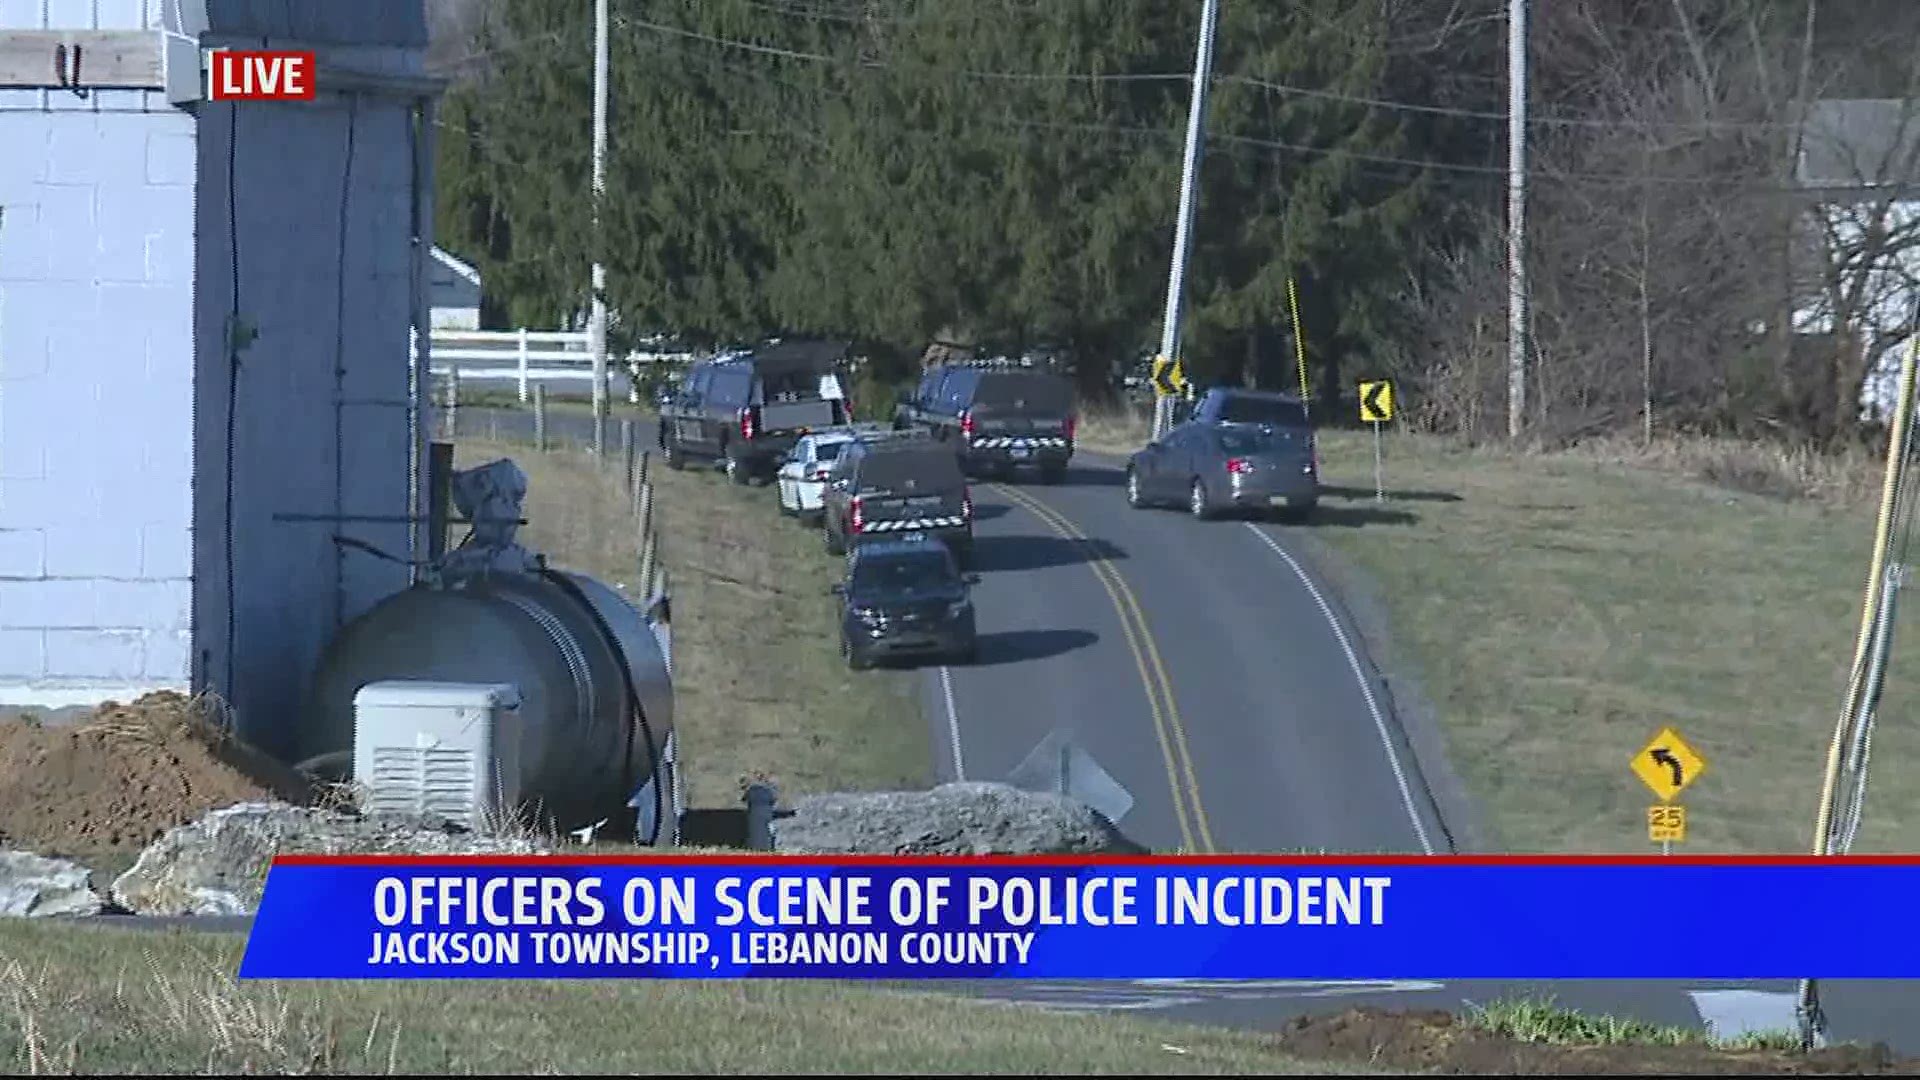 Police On Scene Of Reported Incident In Jackson Township